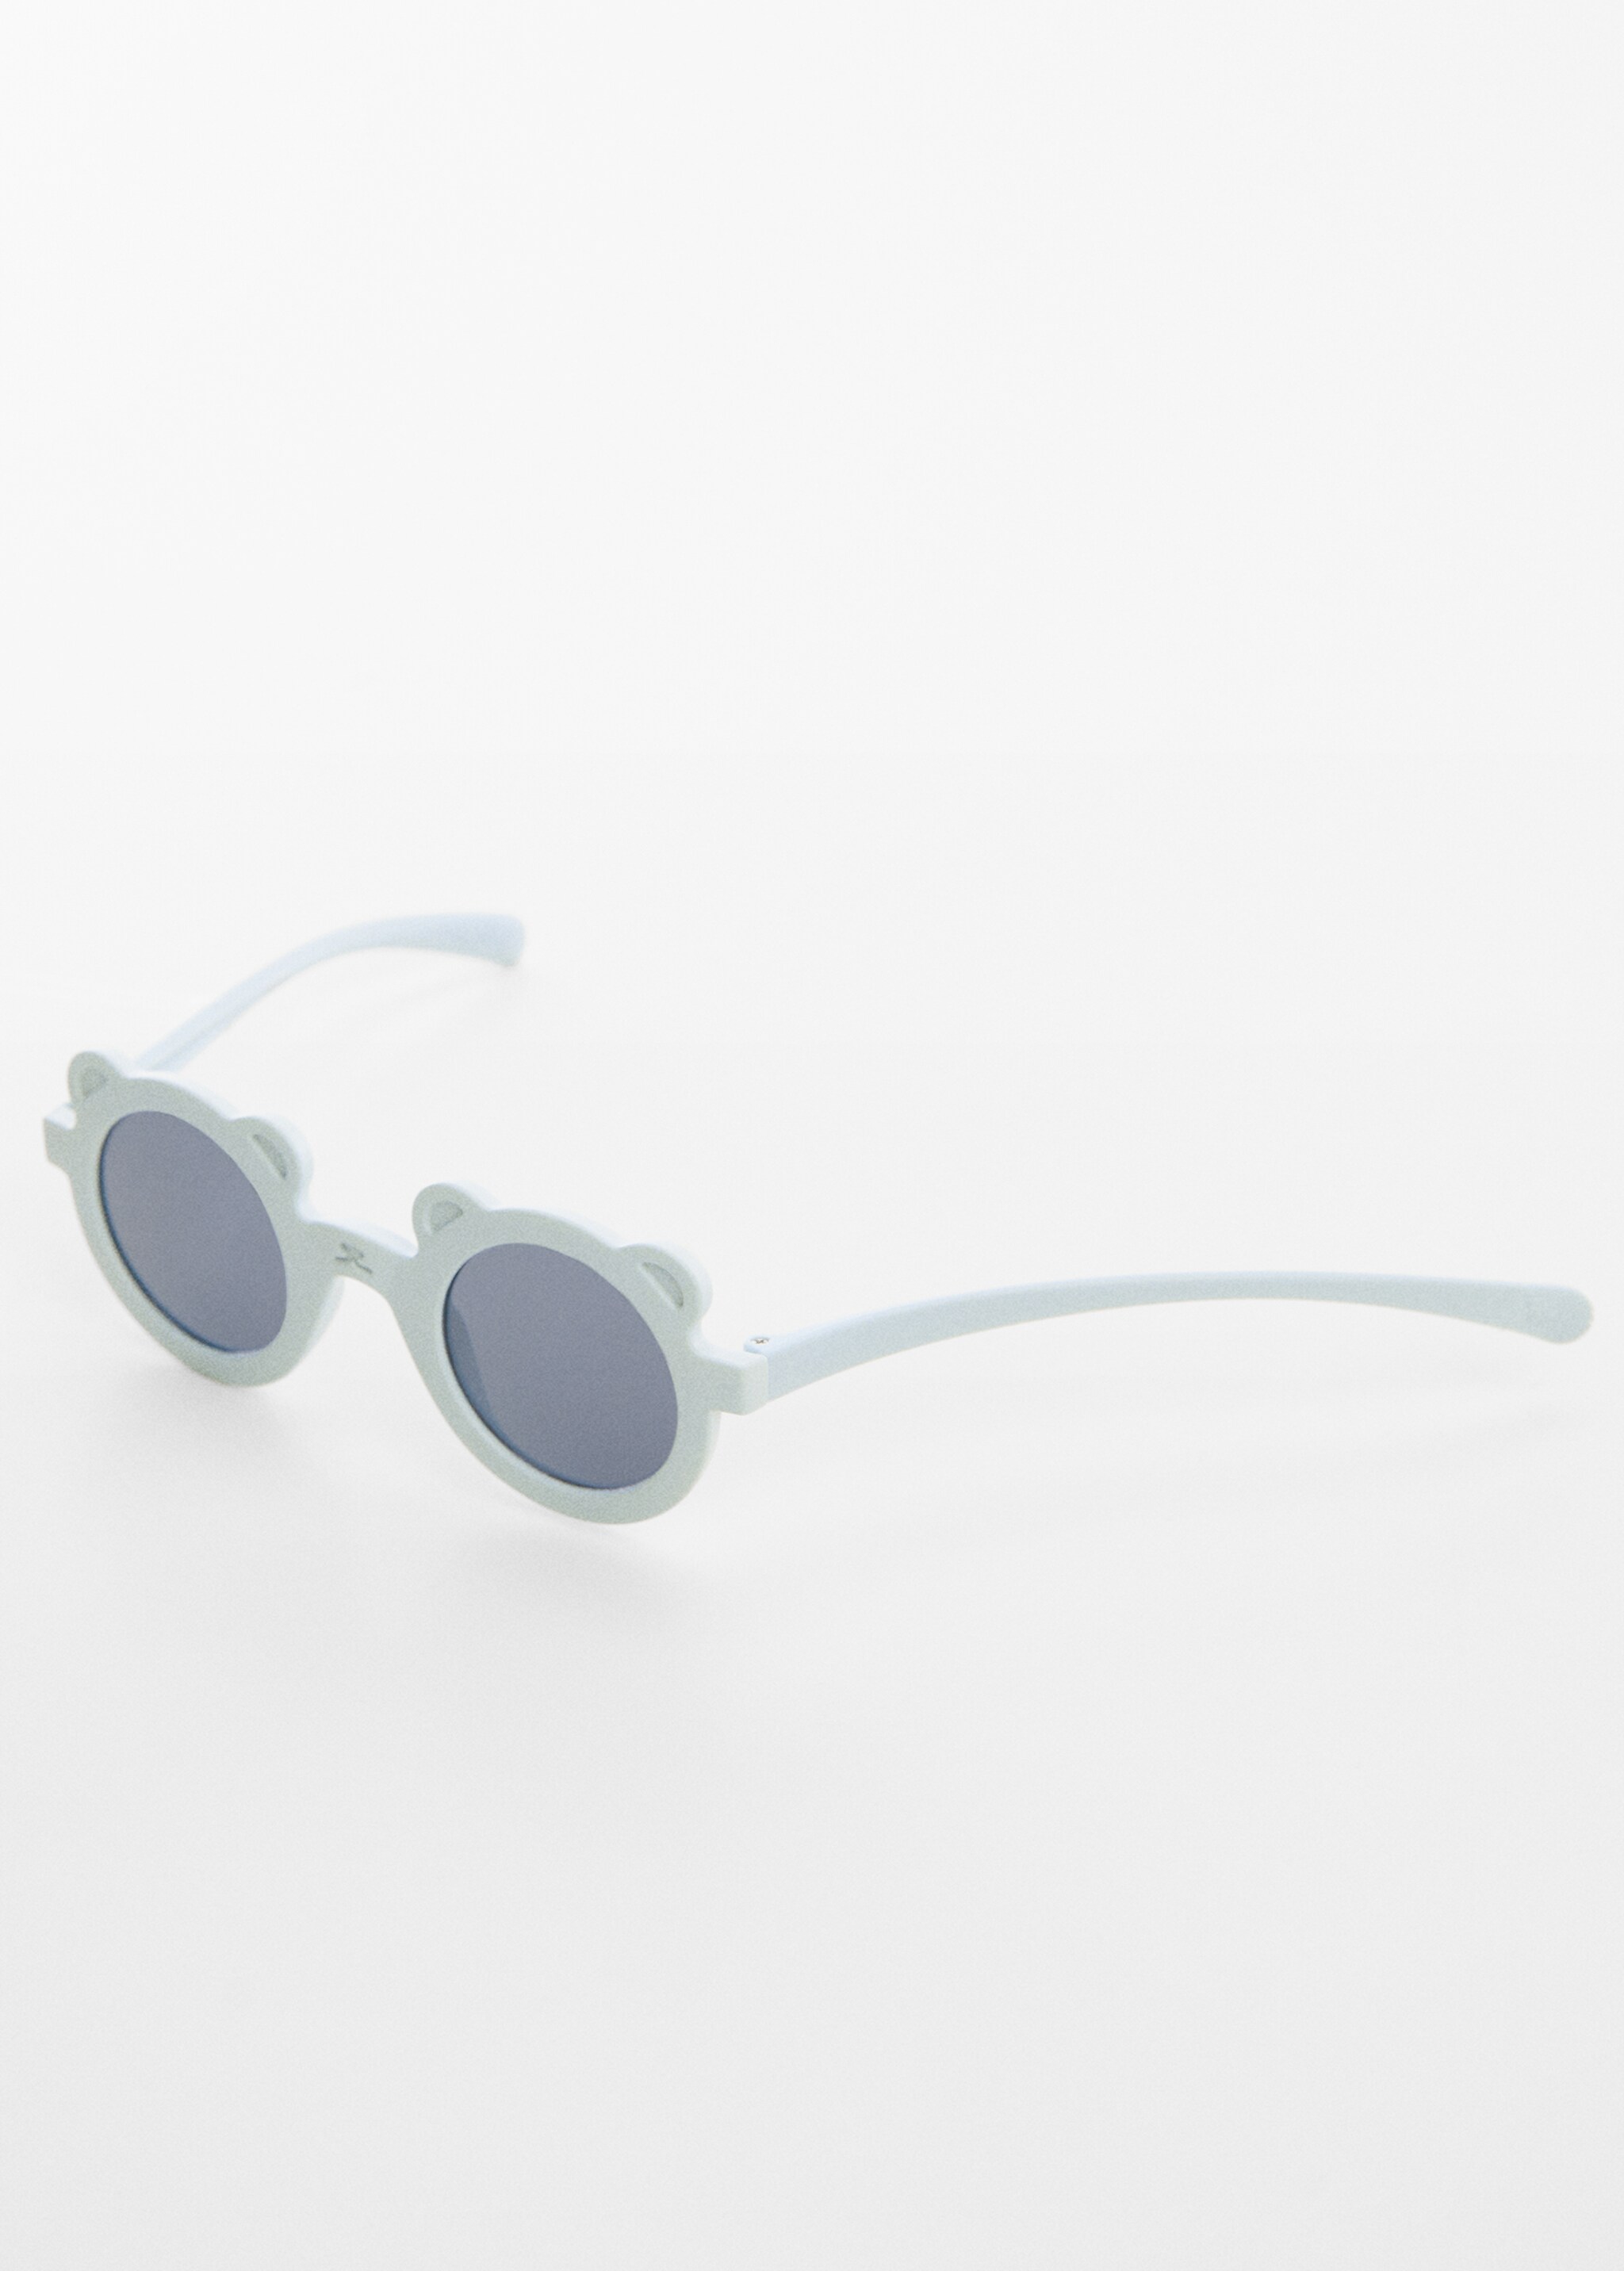 Teddy bear sunglasses - Details of the article 2